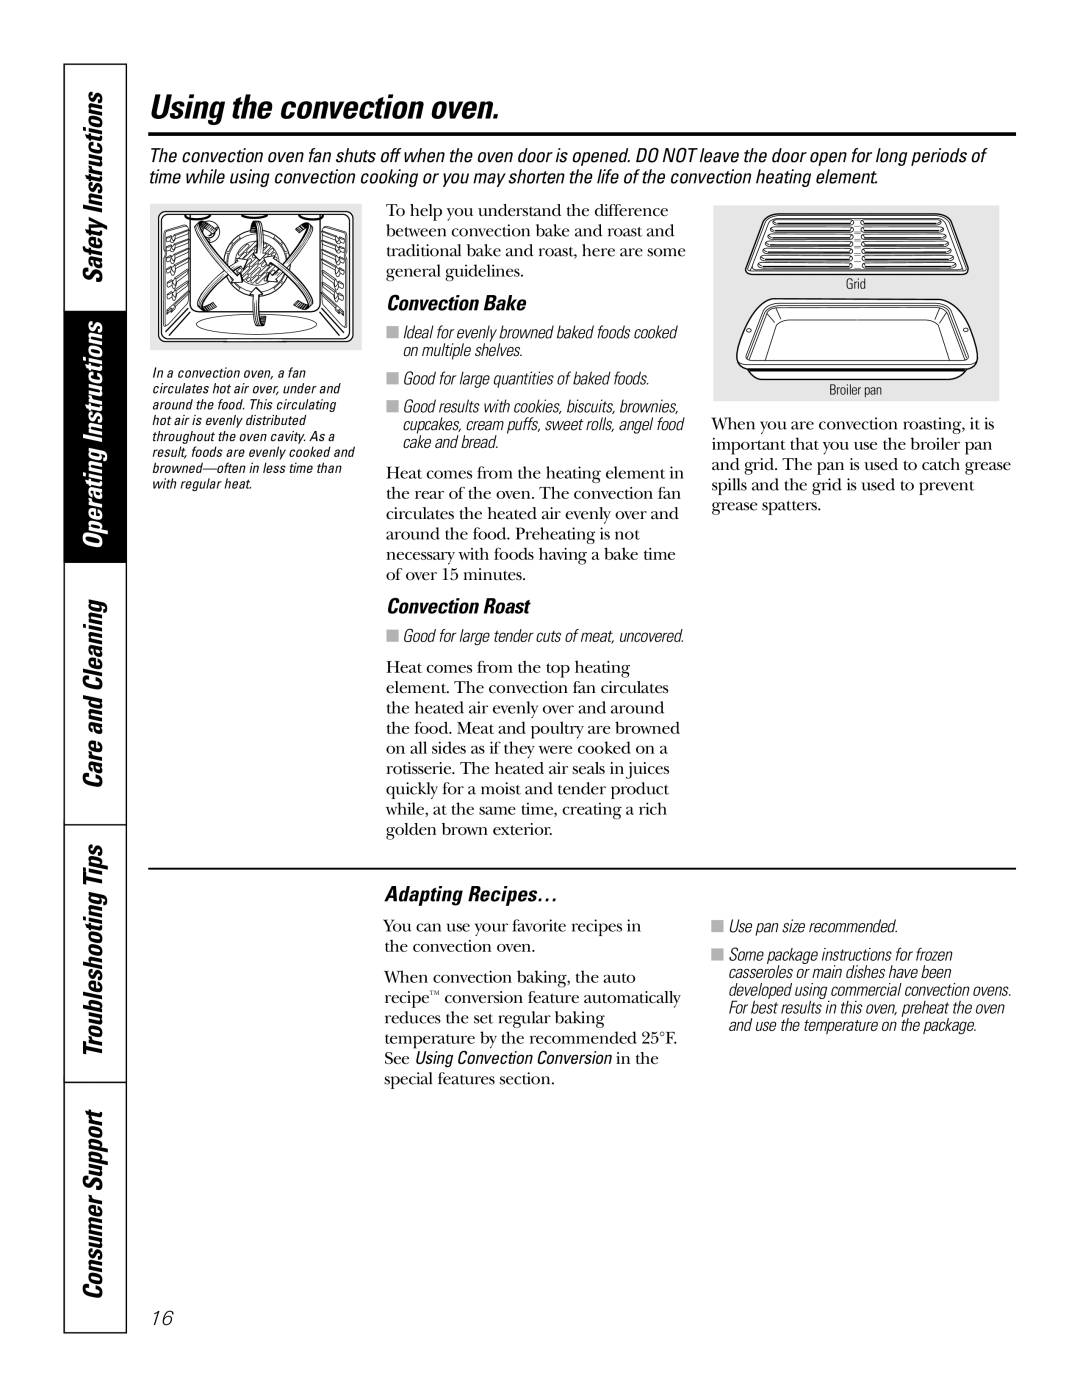 GE JBP84 owner manual Using the convection oven, Tips Care and Cleaning, Operating Instructions Safety, Convection Bake 